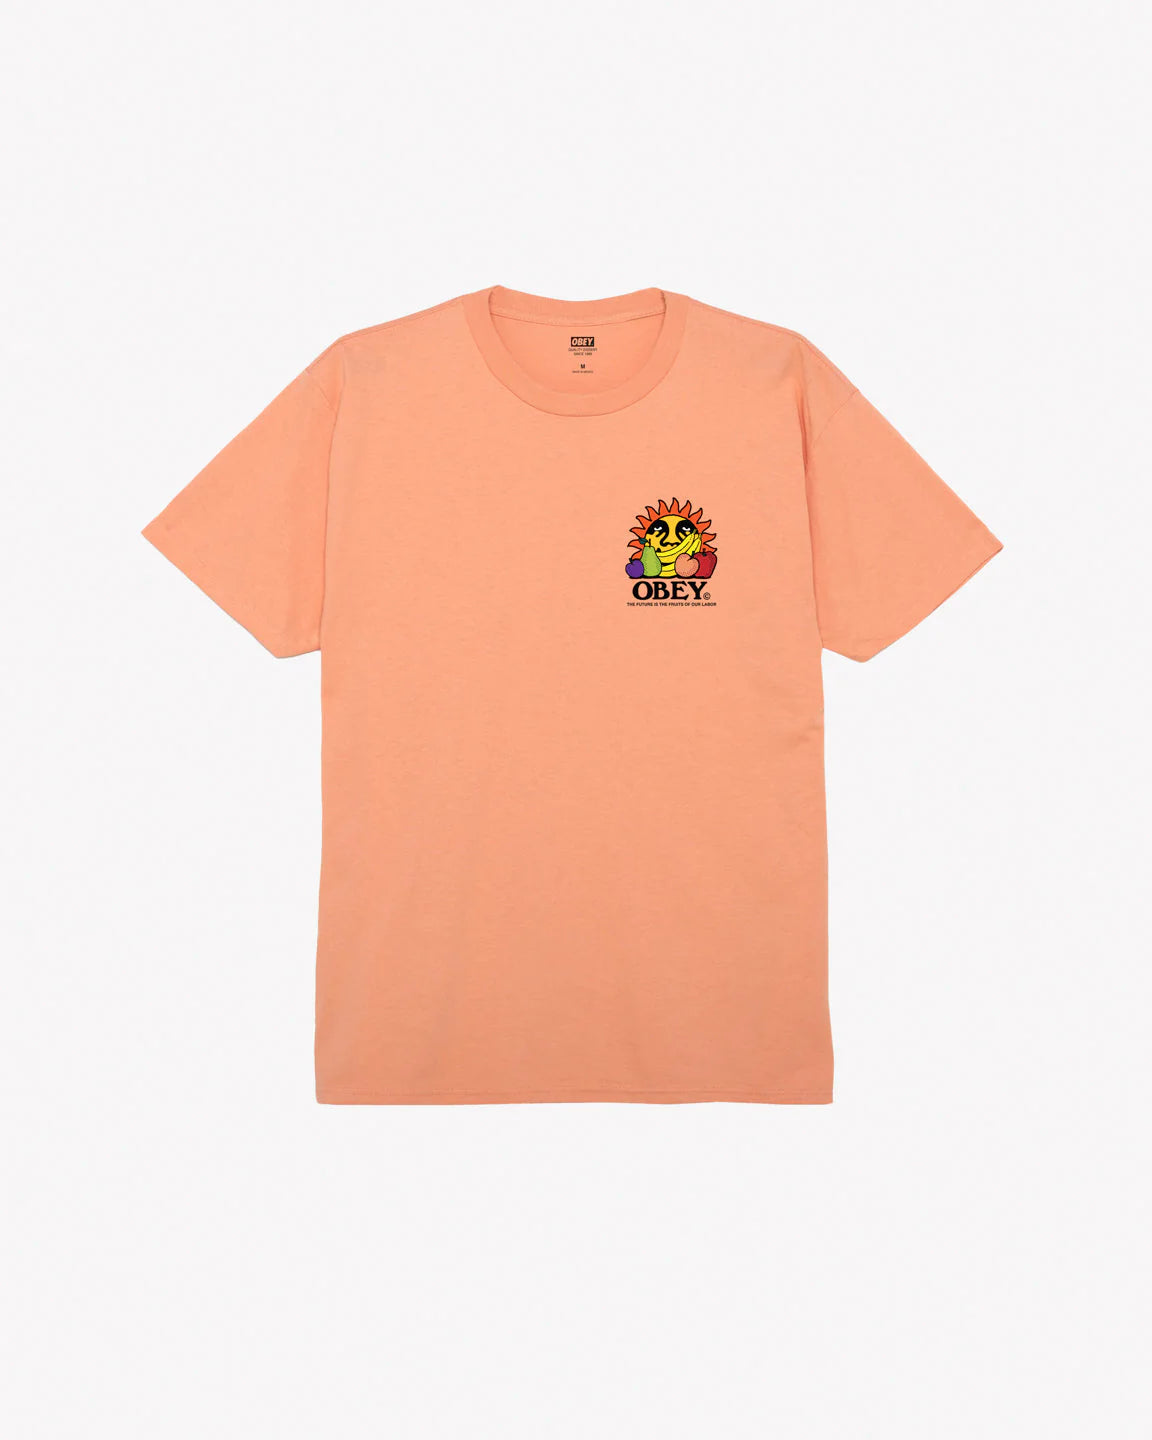 OBEY THE FUTURE IS THE FRUITS OF OUR LABOR CLASSIC T-SHIRT - Citrus